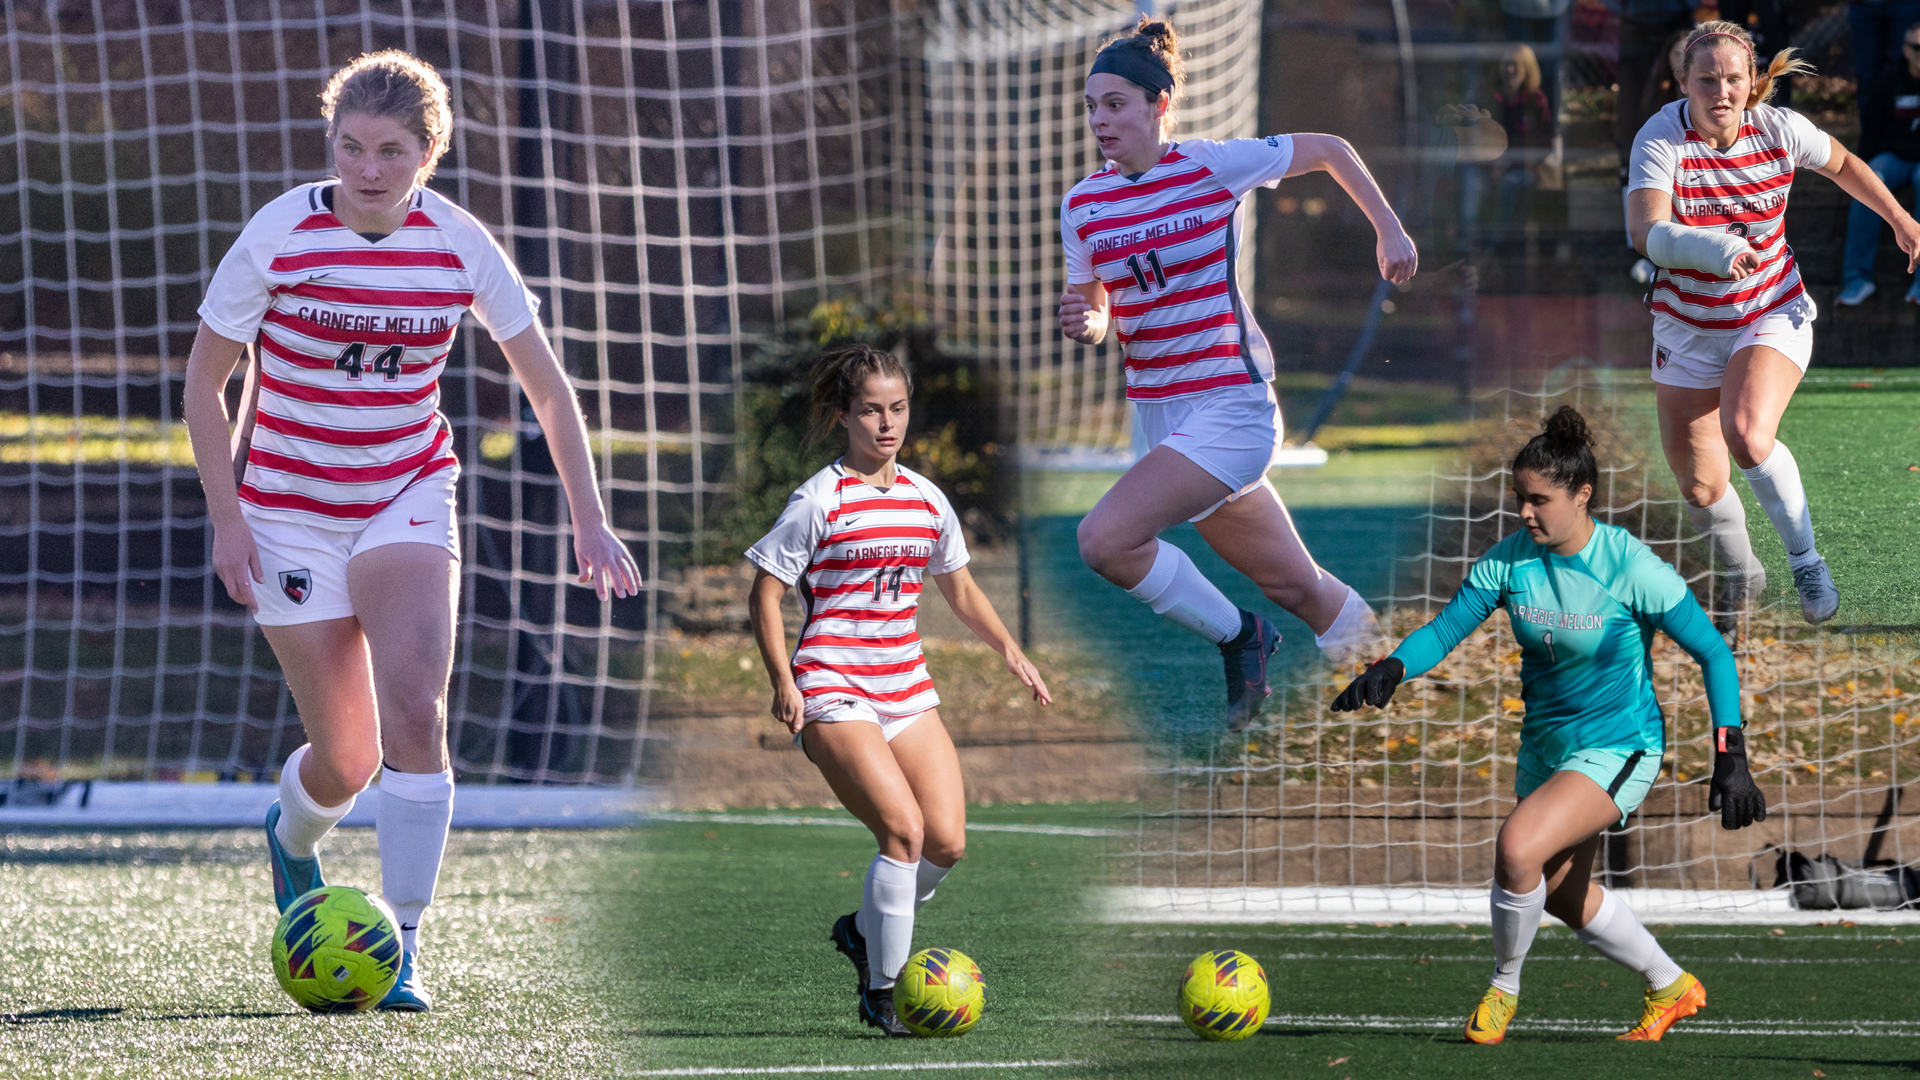 collage of five women's soccer players in action during a game